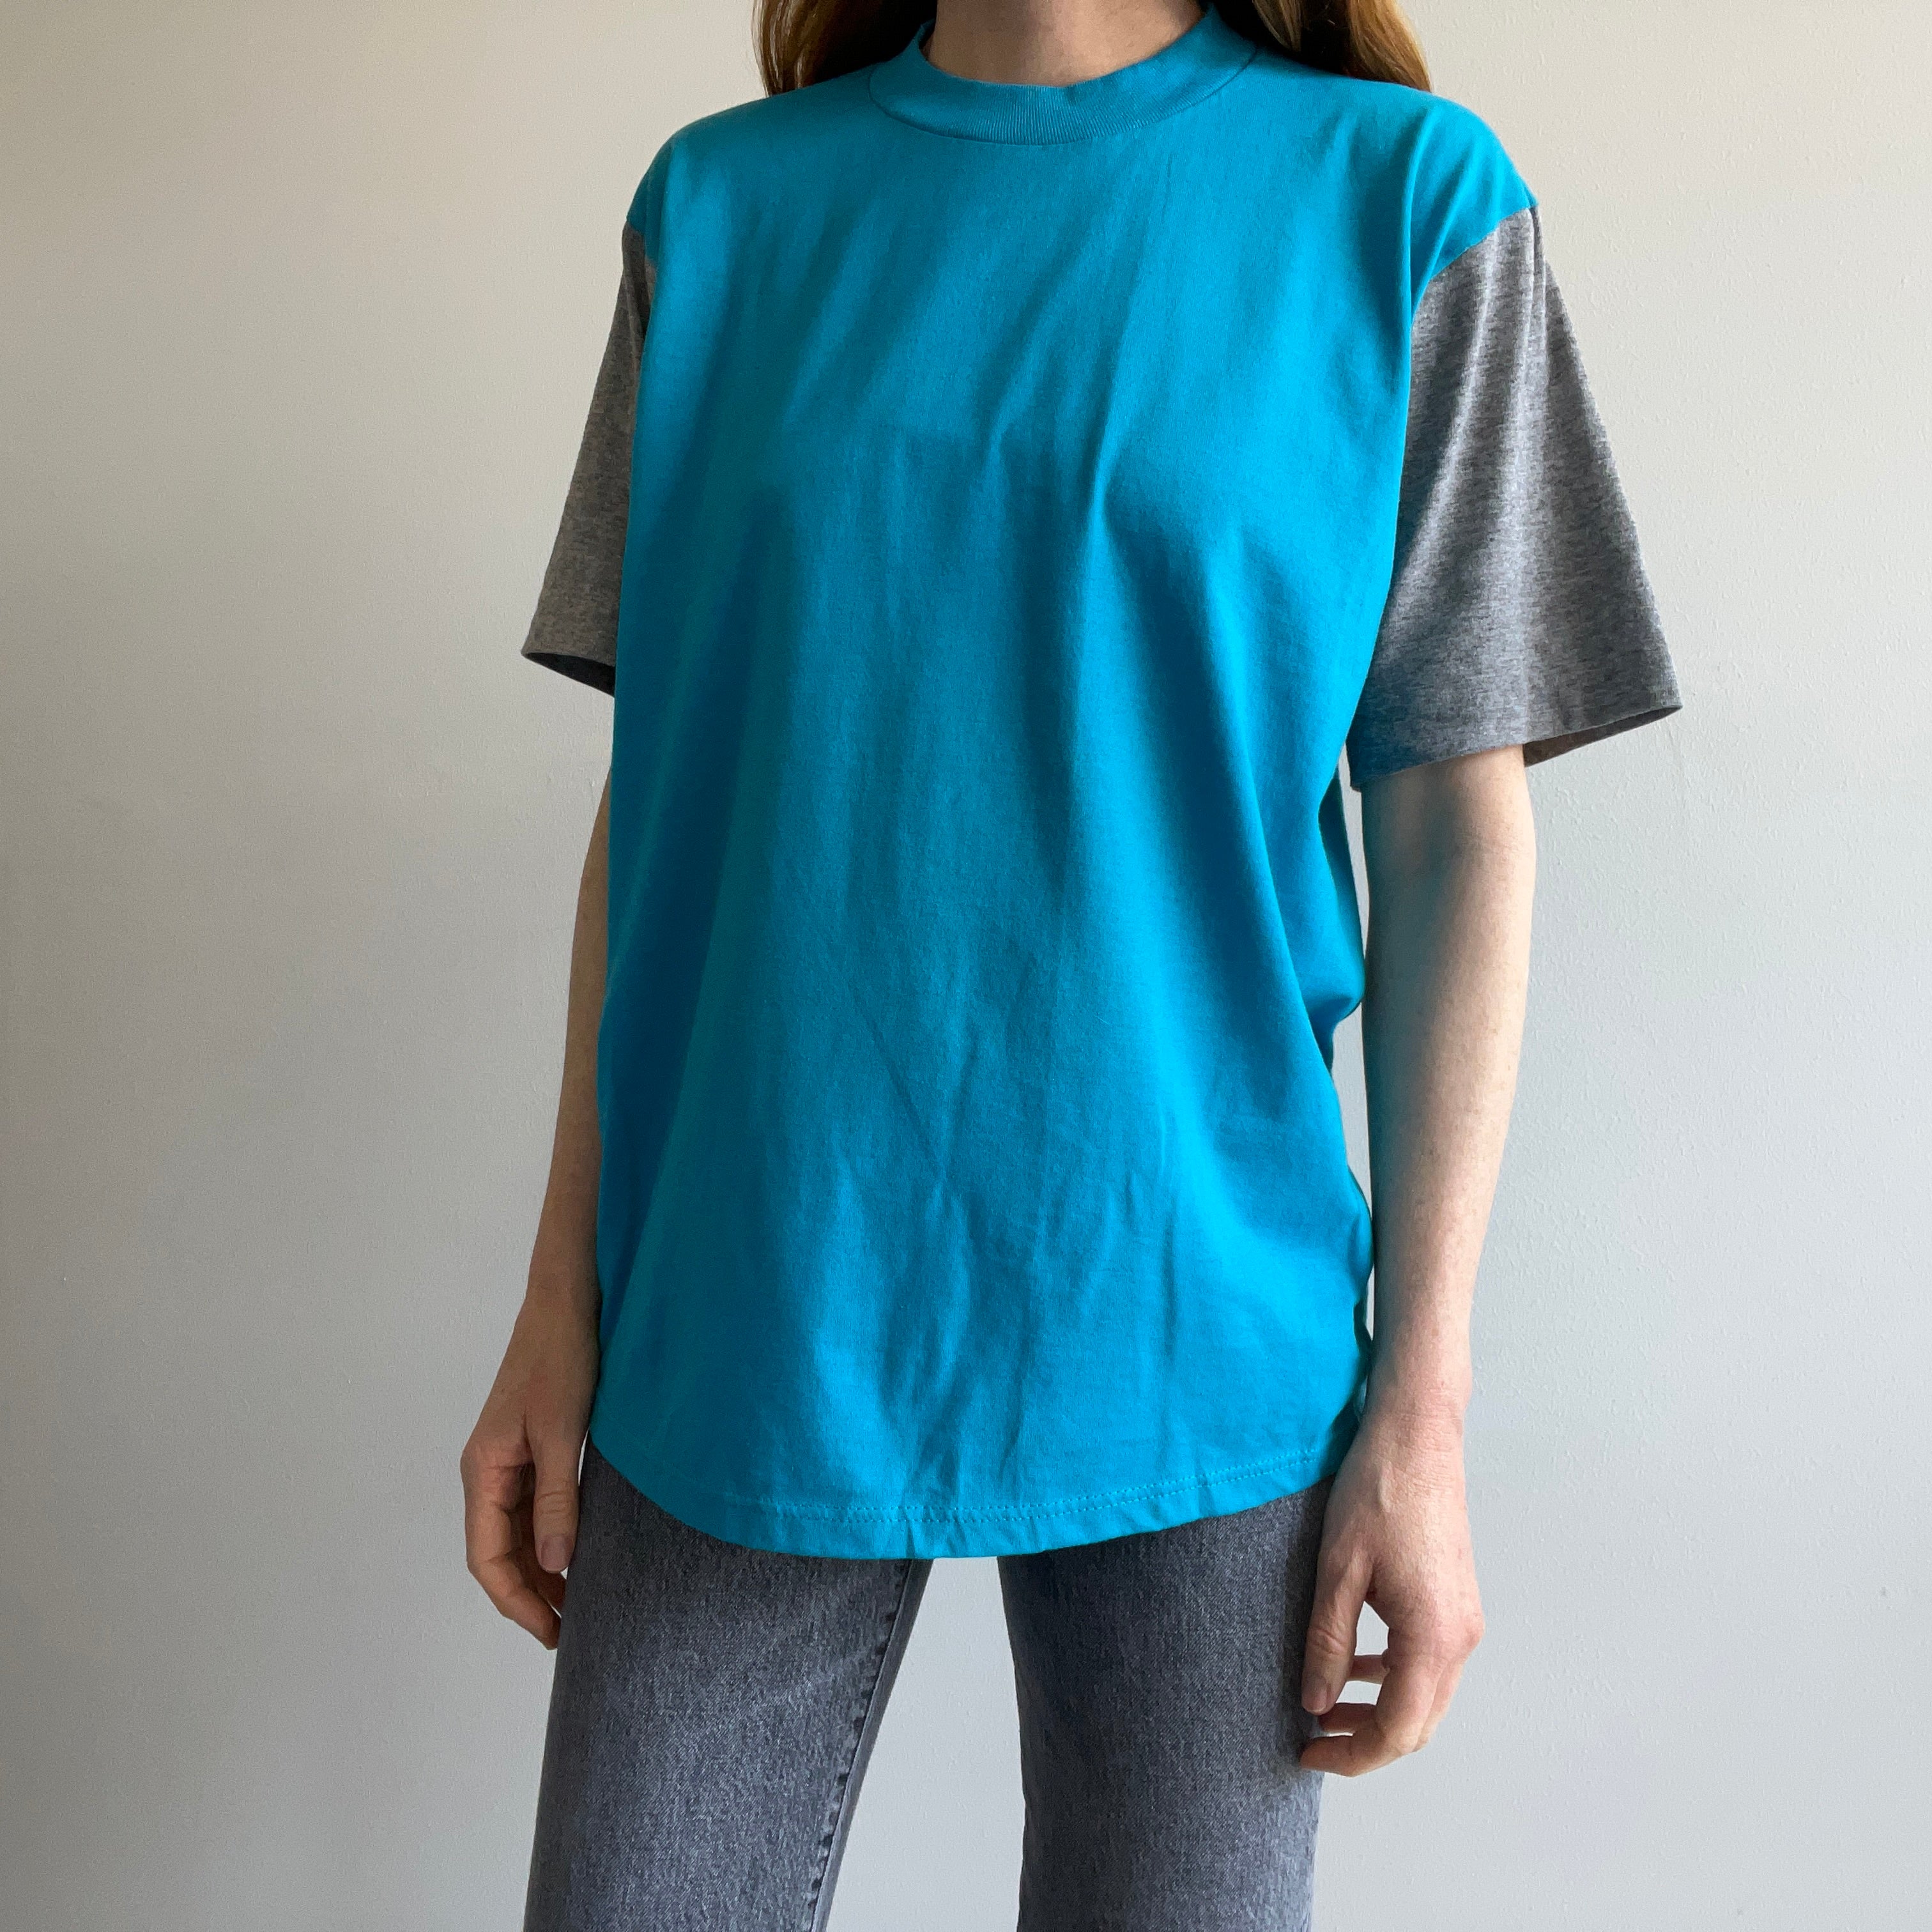 1980s Two Tone Blank T-Shirt